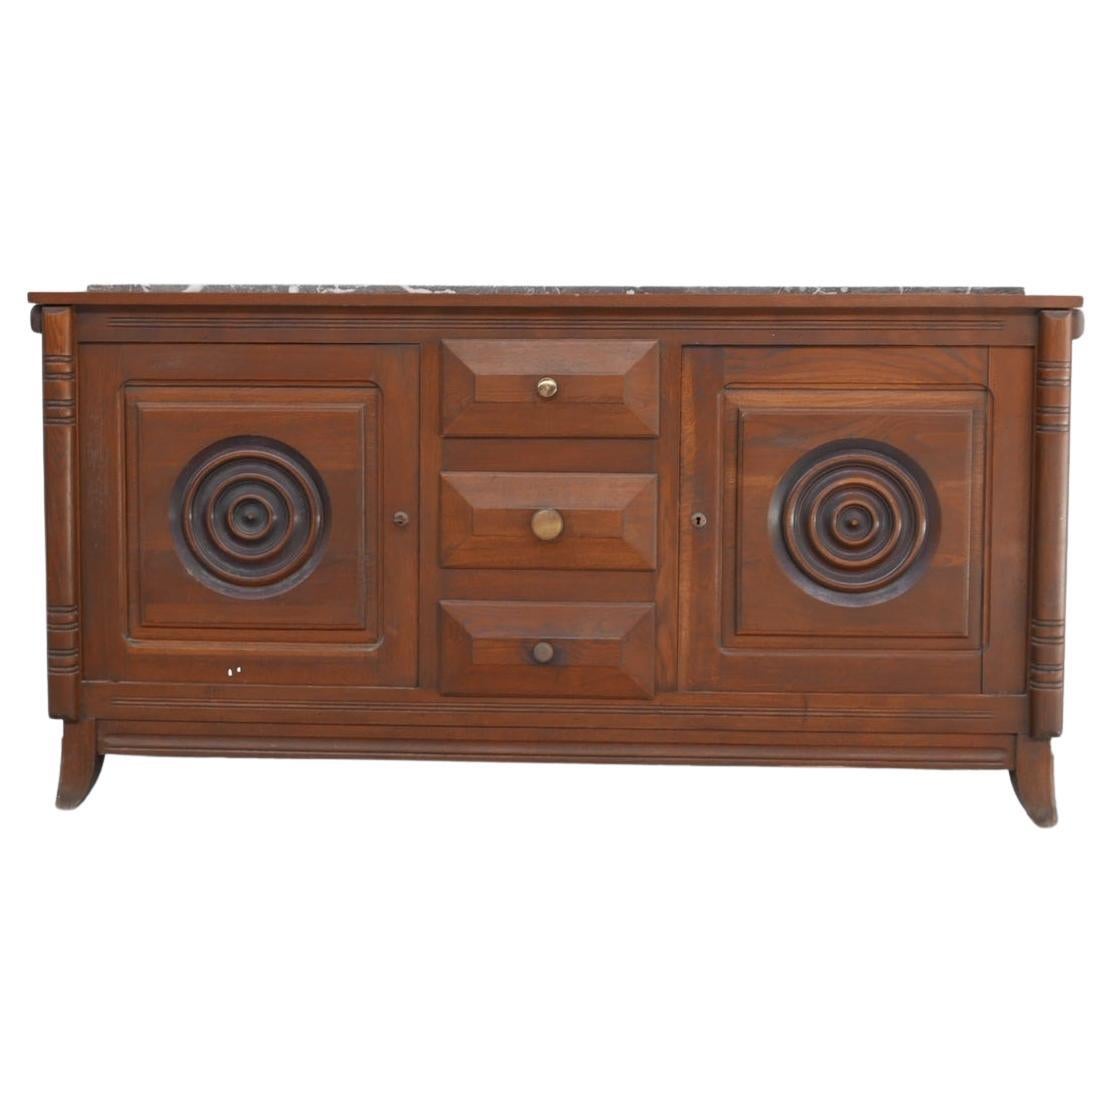 Dudouyt Style French Art Deco Oak and Marble Sideboard For Sale